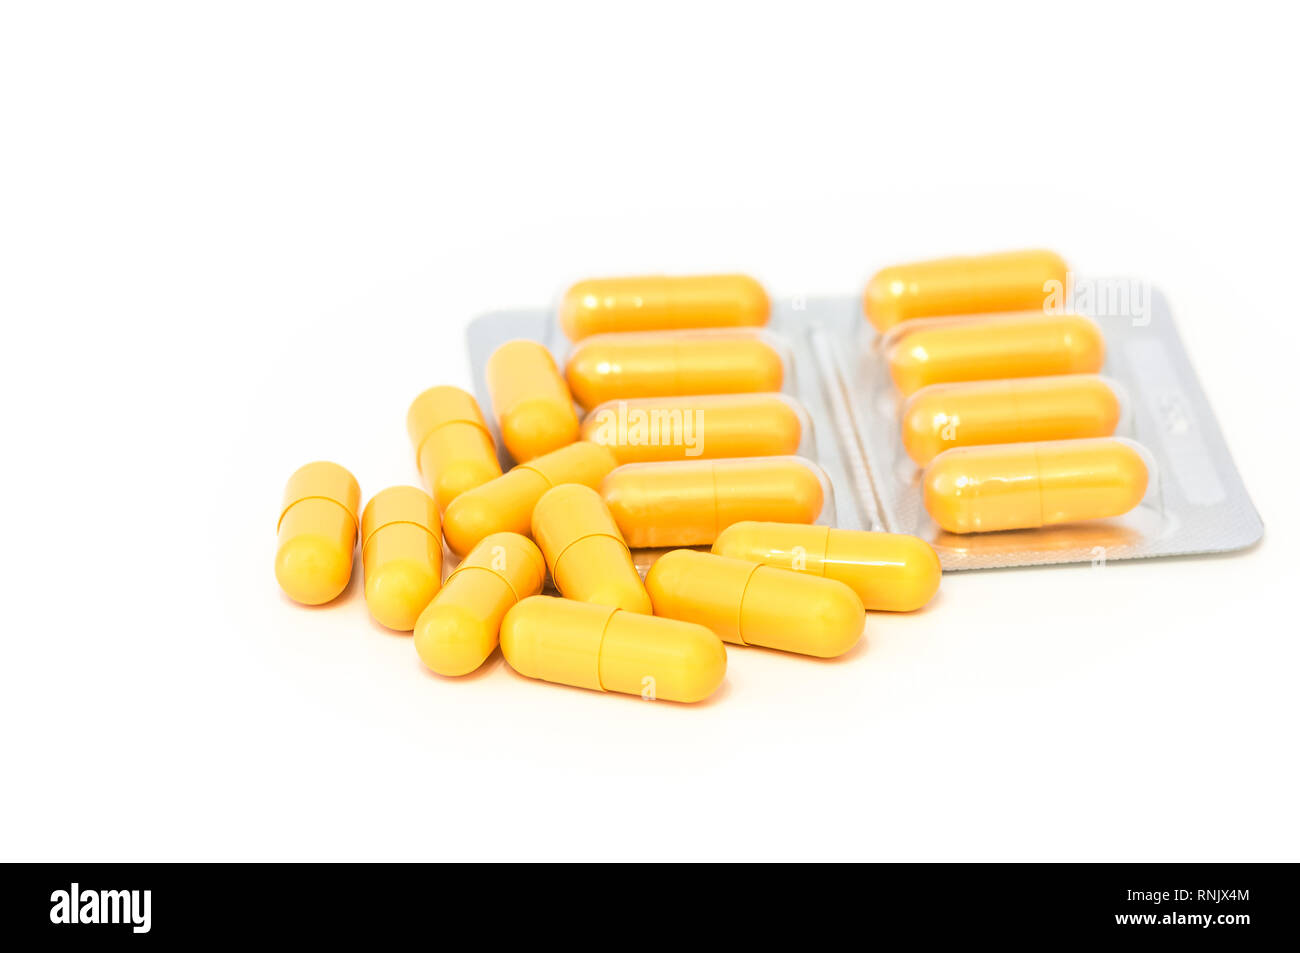 Download Bright Yellow Pills And Blisters Scattered On A White Background Isolated Stock Photo Alamy PSD Mockup Templates